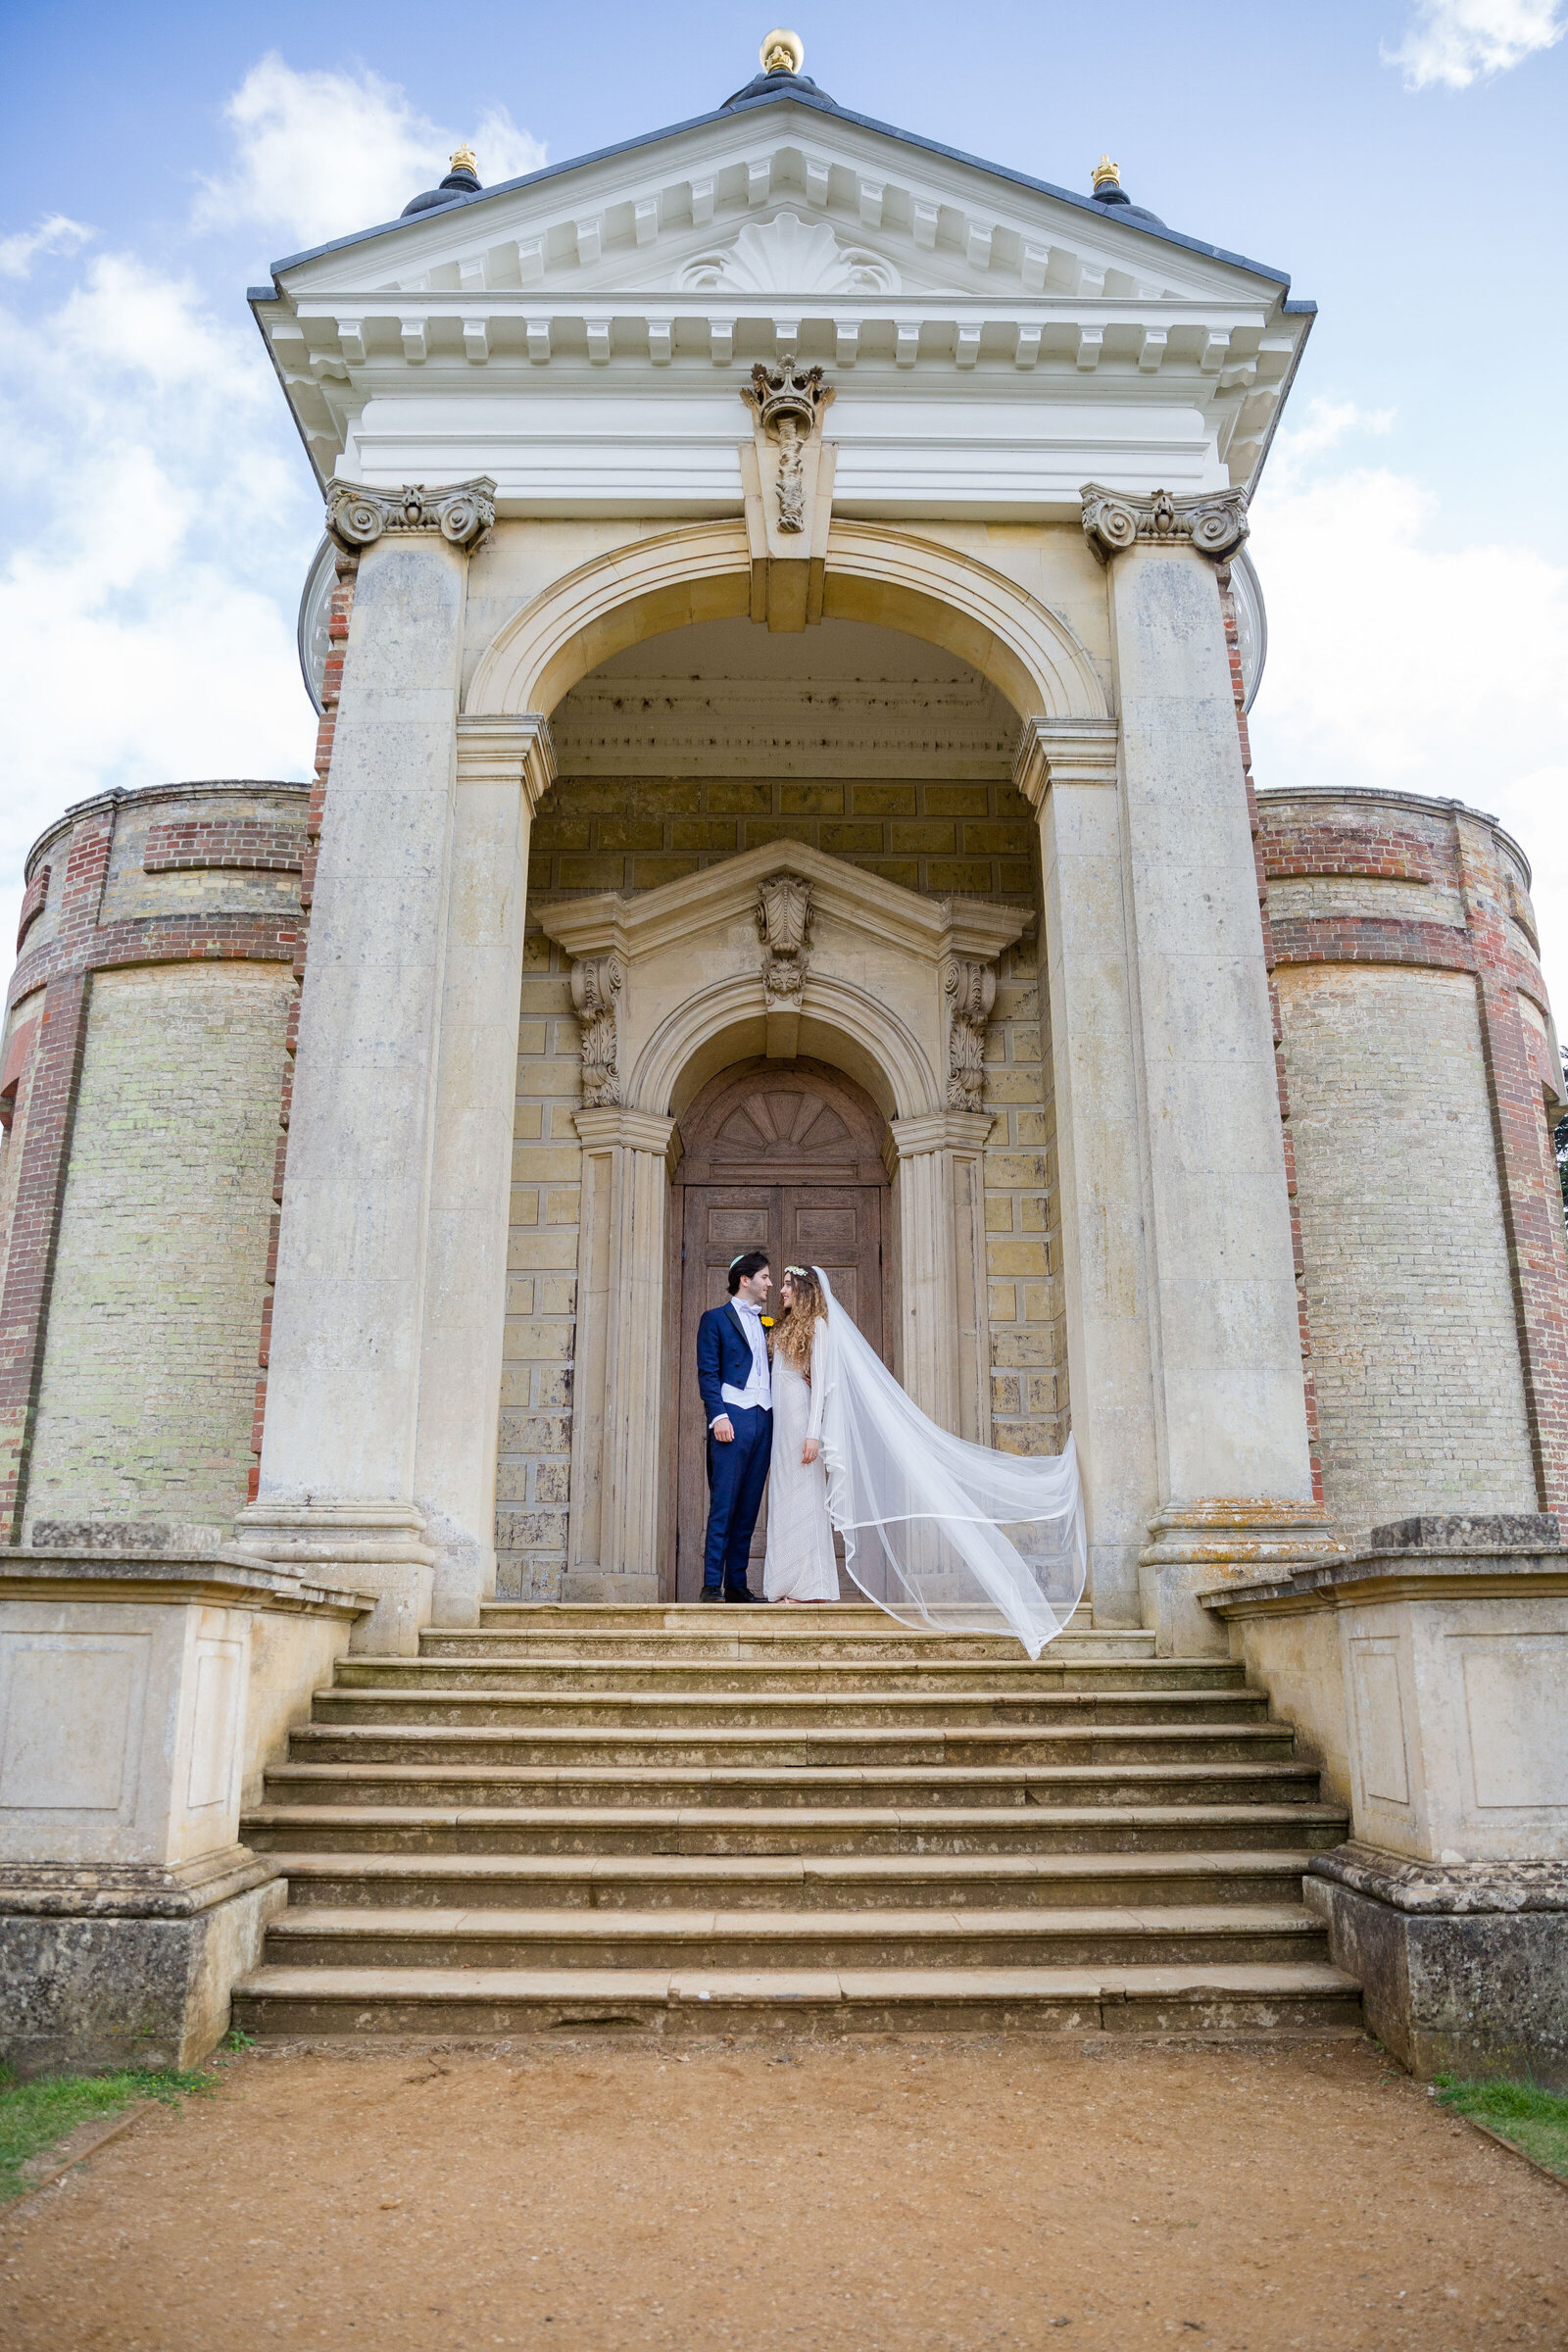 The Bride and Groom kiss at Wrest park